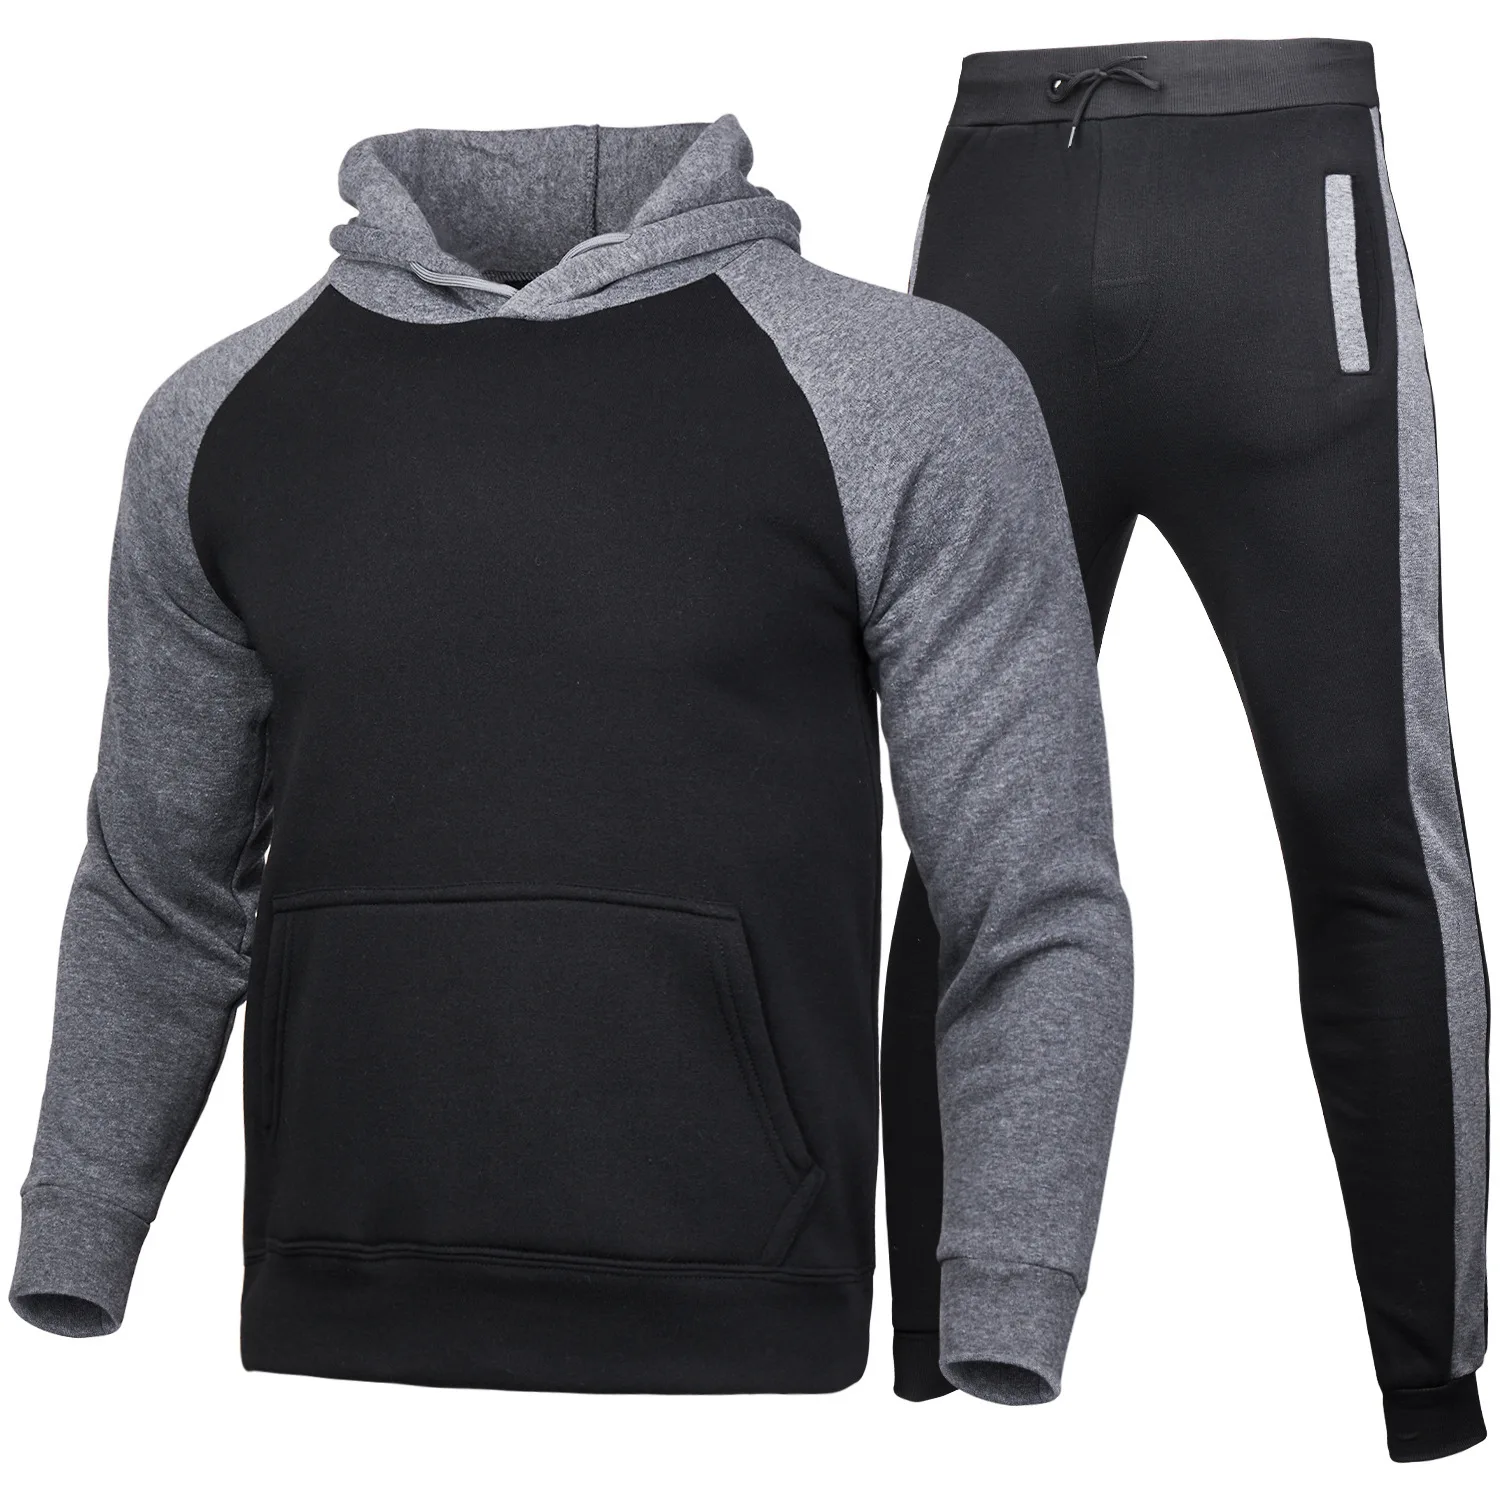 Men Women Patchwork Hoodies+Pants Sets Tracksuit Students Running Fitness Sportswear Casual Pullover Sweat Suits Couples Outwear